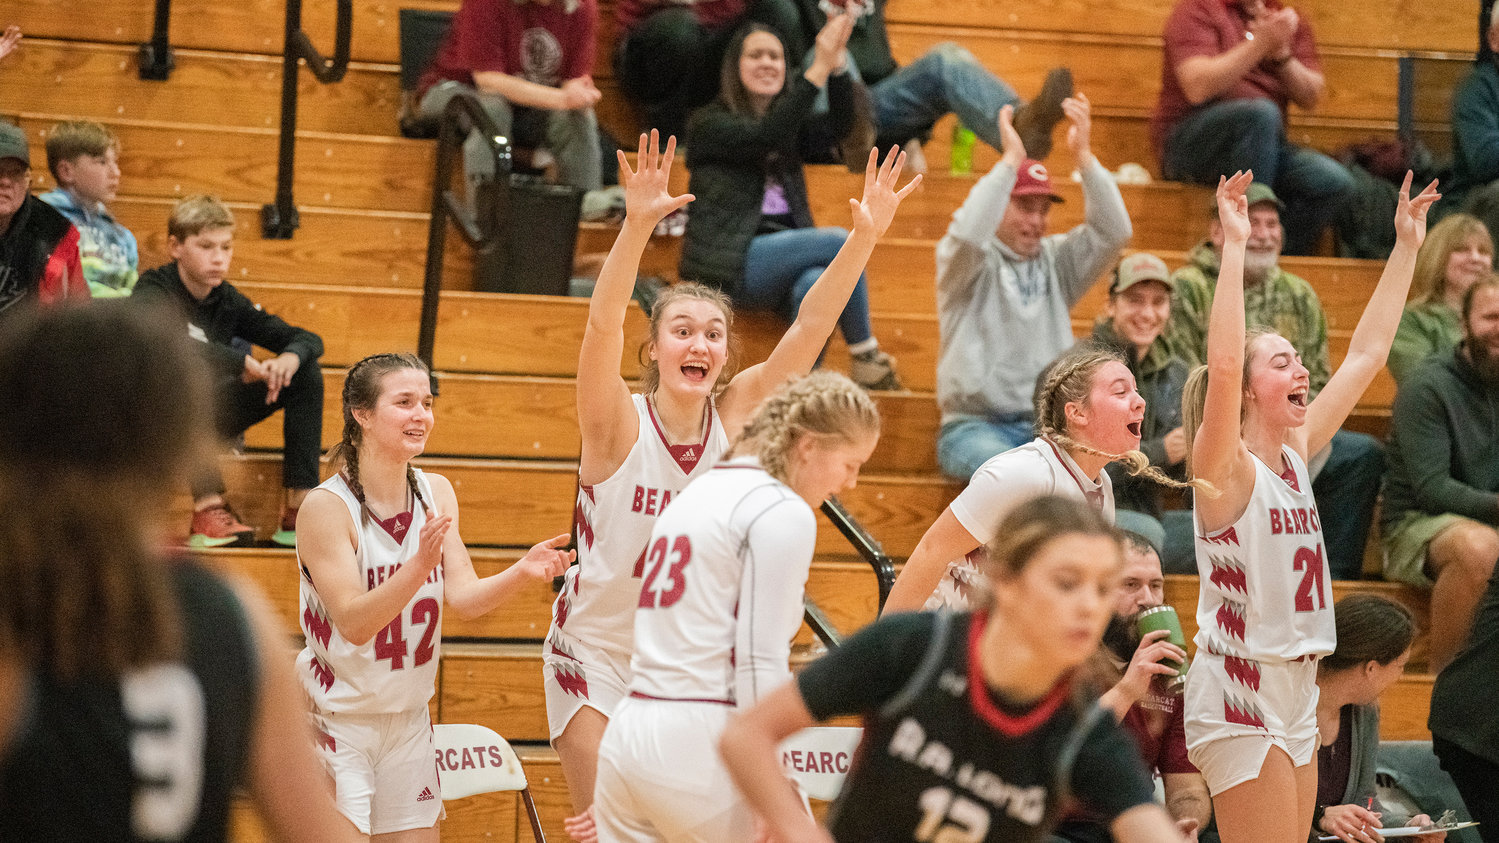 Bearcat athletes celebrate a score Tuesday night during a game against R.A. Long in Chehalis.